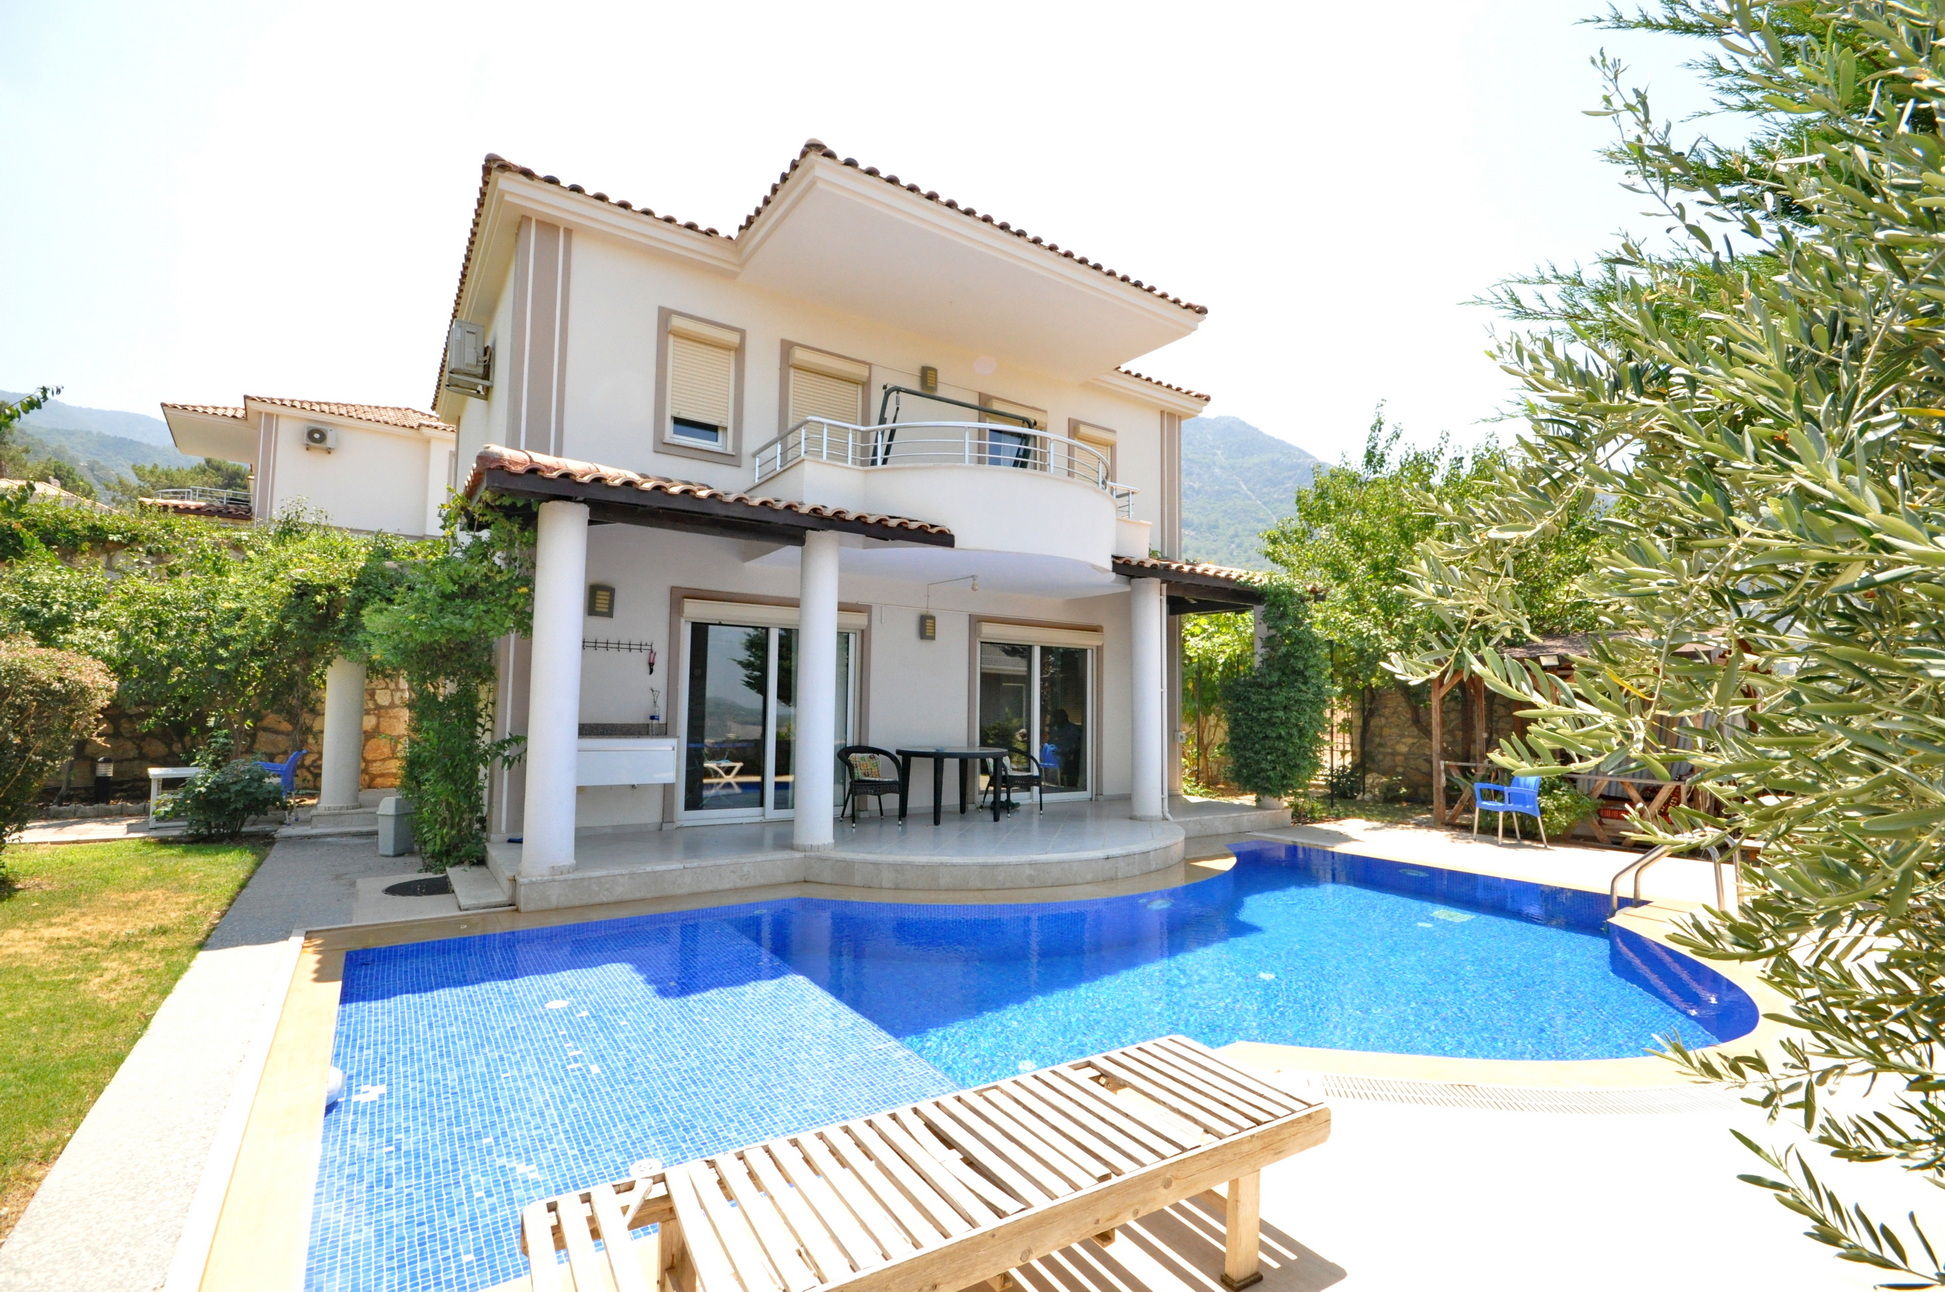 4 Bedroom Detached Villa with Private and Shared Pools in Ovacik